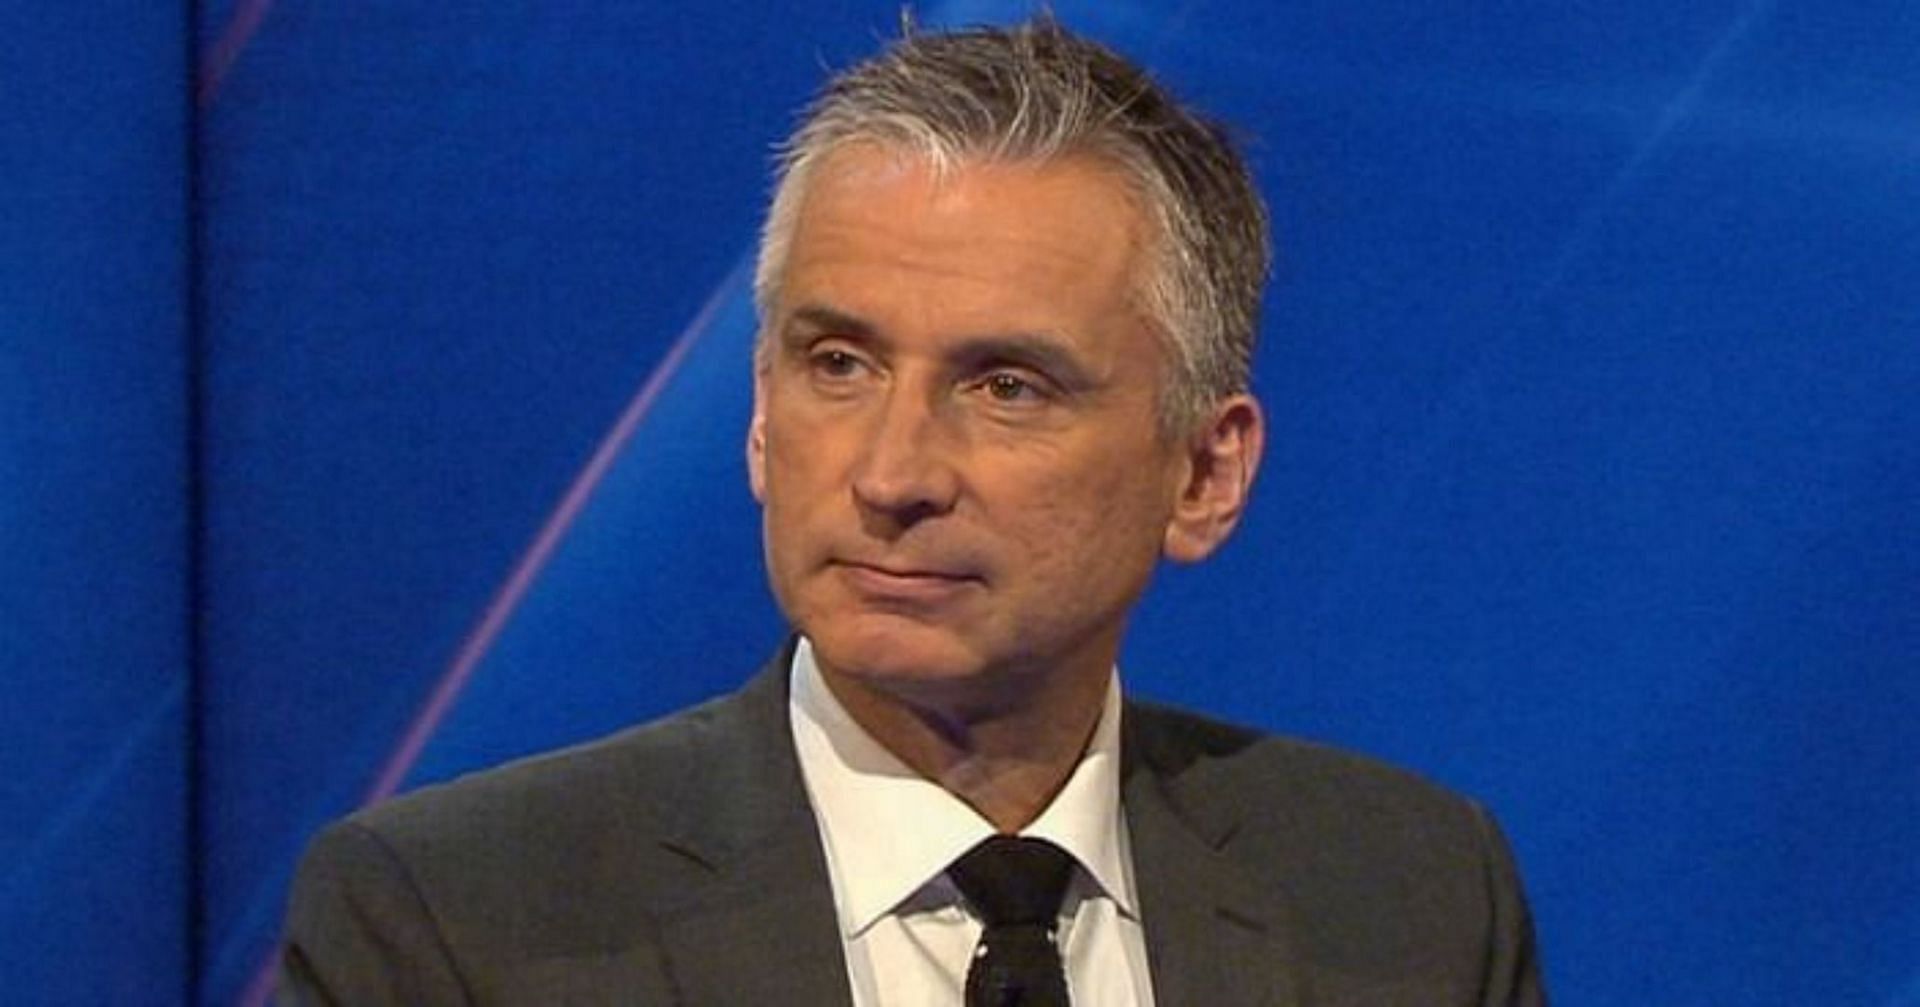 Alan Smith represented England professionally and his commentary exhibits great understanding of the game.